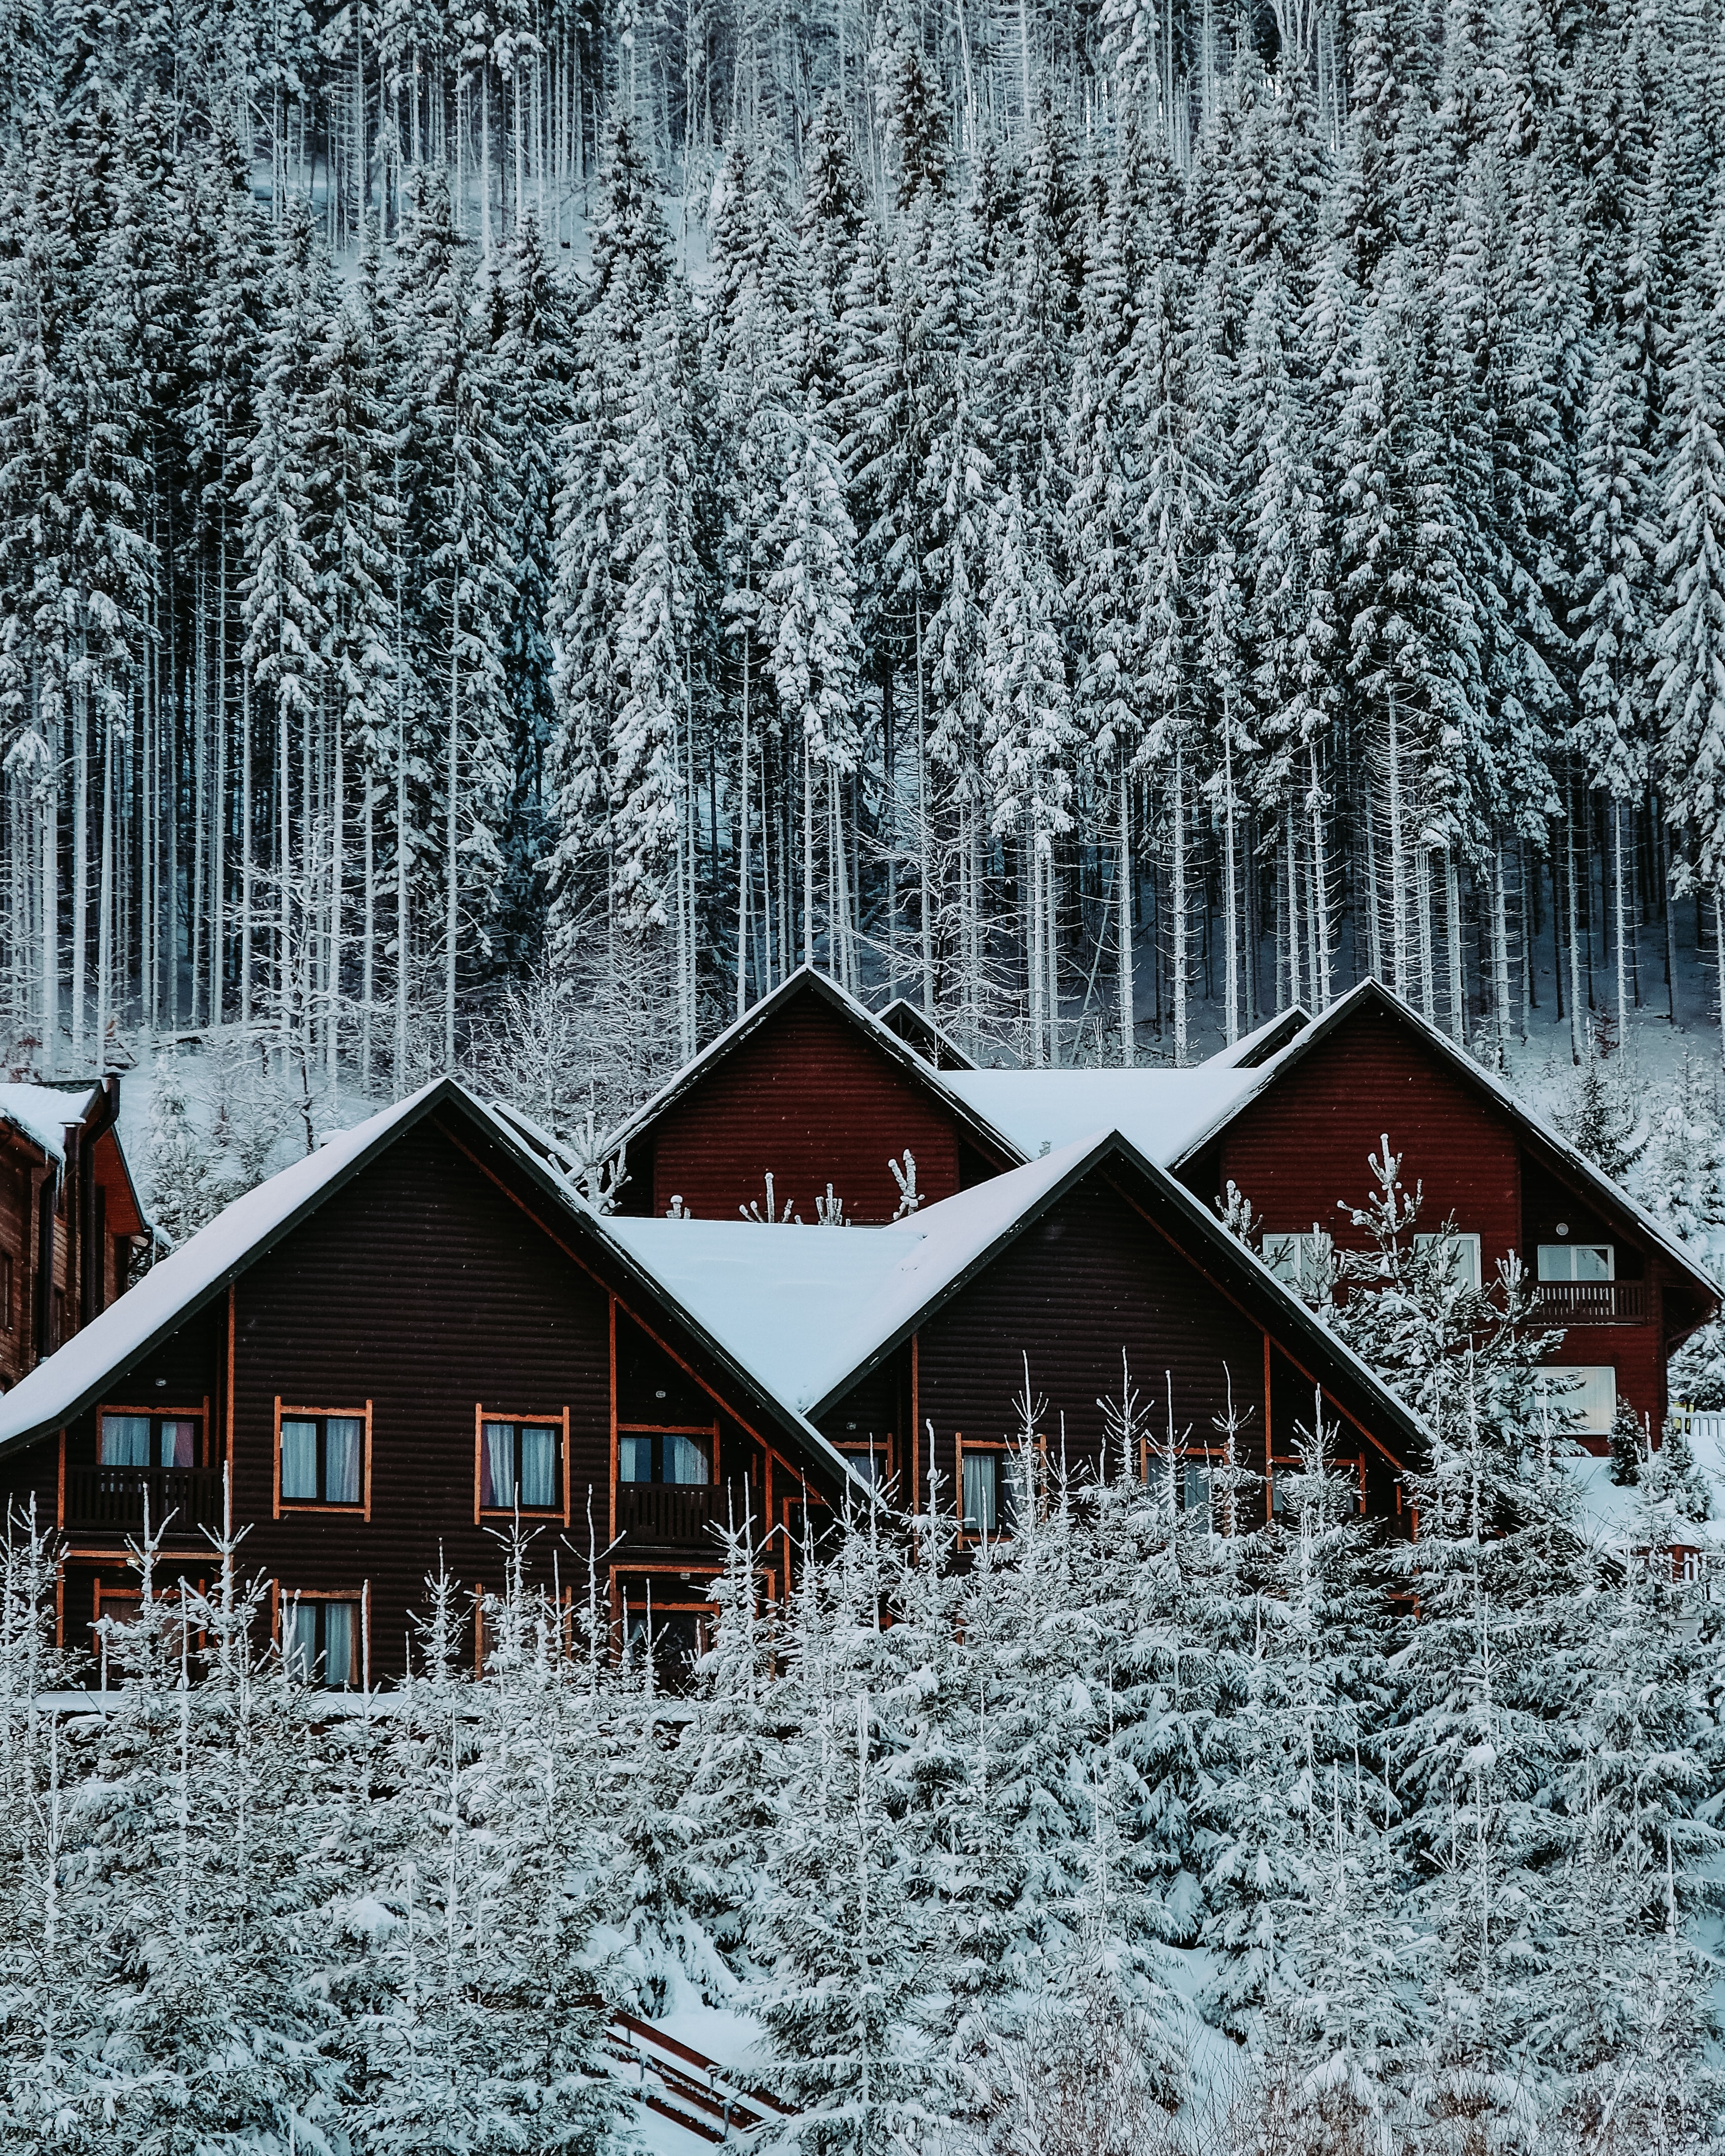 Download PC Wallpaper winter, nature, houses, snow, forest